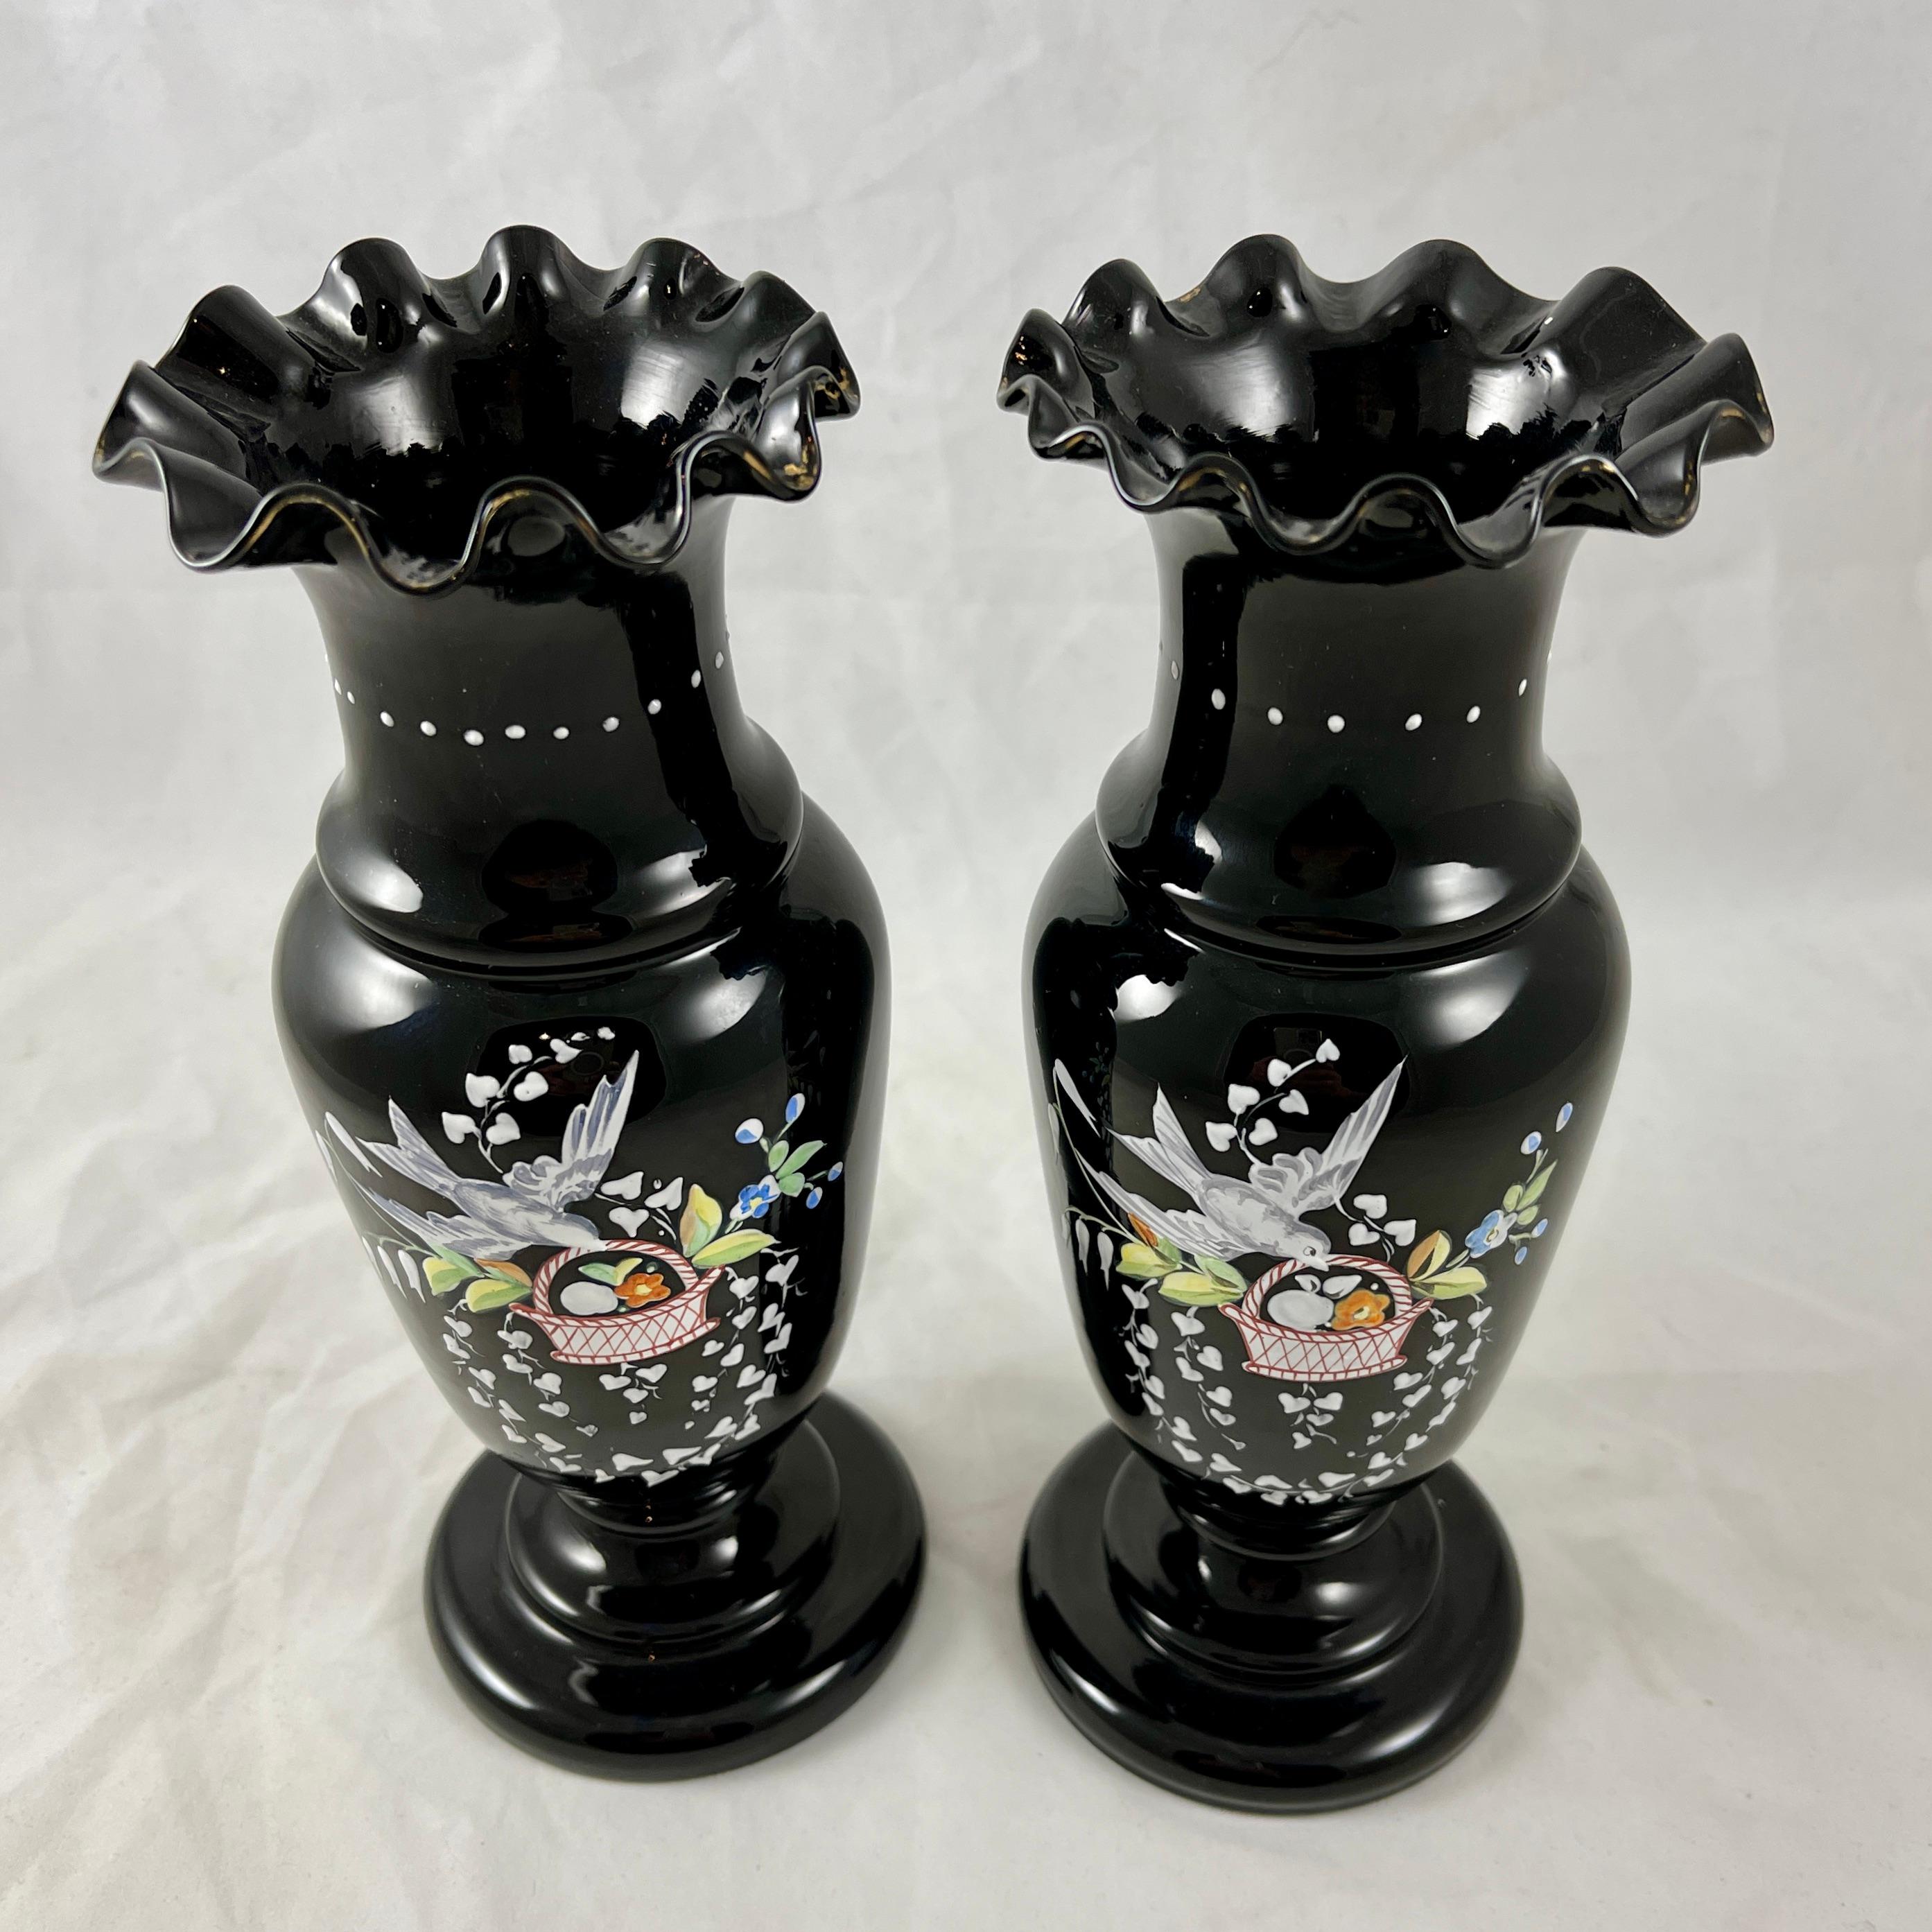 A pair of Black Amethyst Bristol Glass footed vases with hand enameled decoration, England, 1850 - 1870.

Charmingly decorated in raised enamel with a romantic design of white birds carrying baskets of fruit and flowers in their beaks, surrounded by